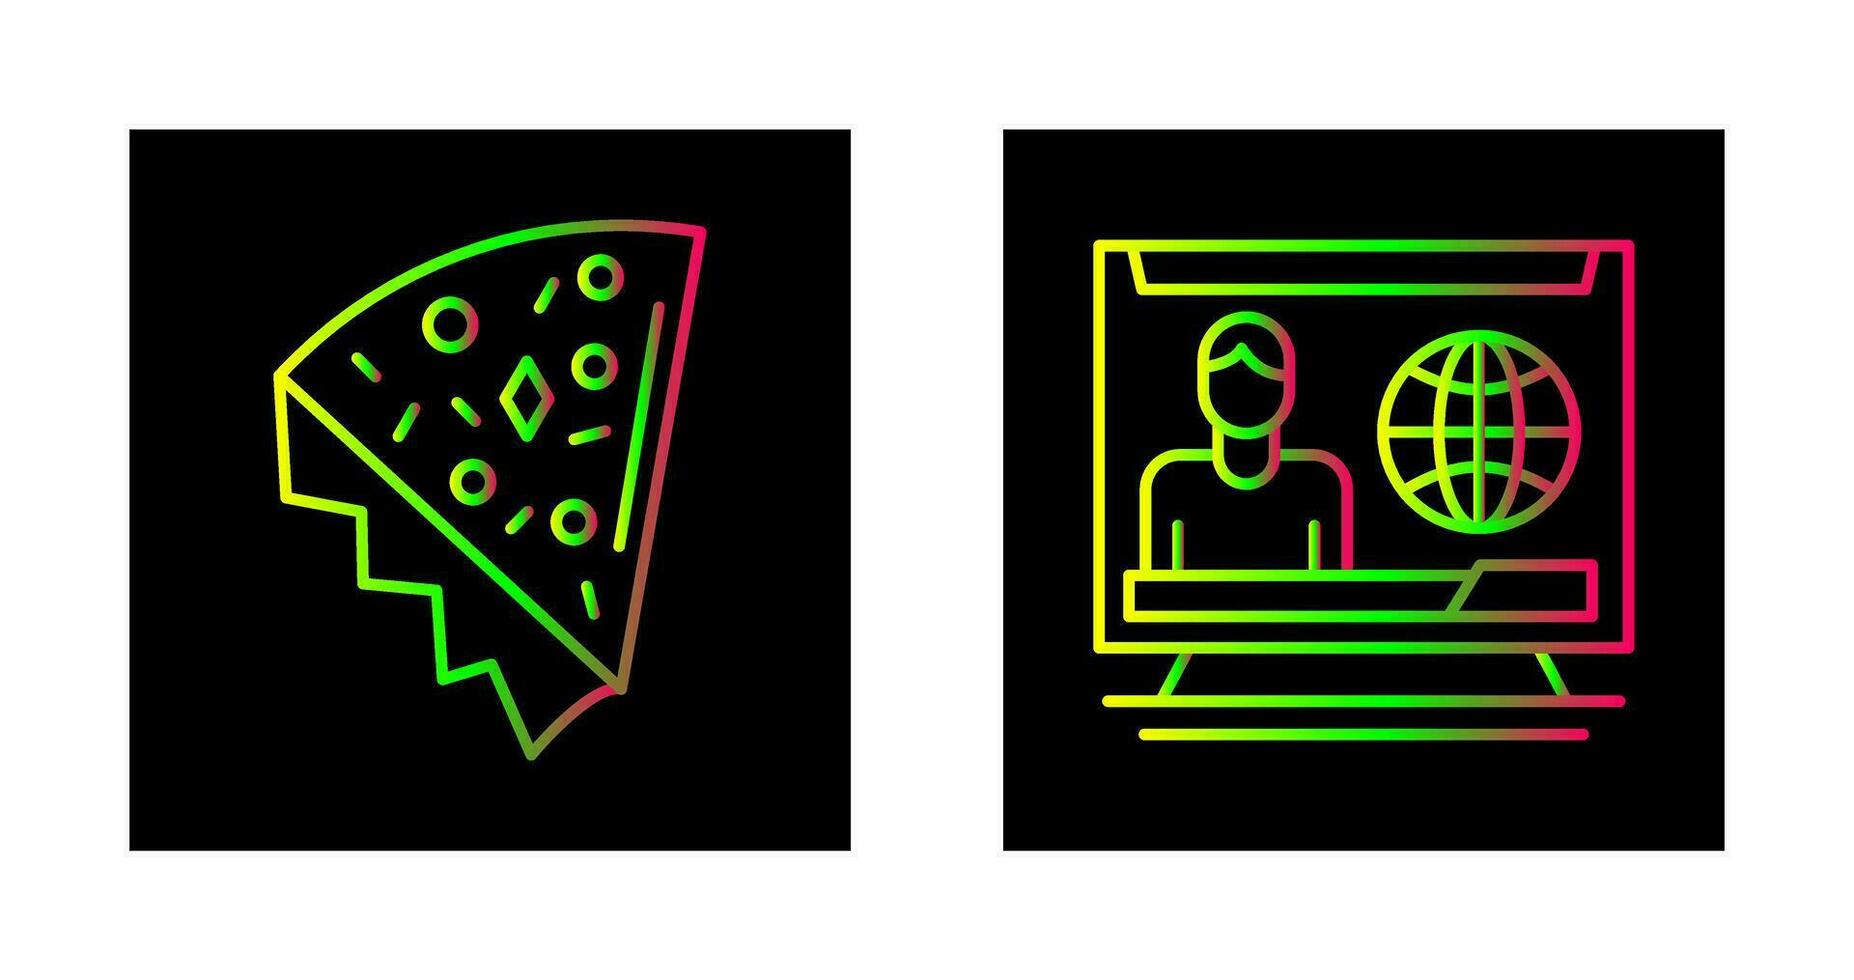 Pizza Slice and T News Icon vector